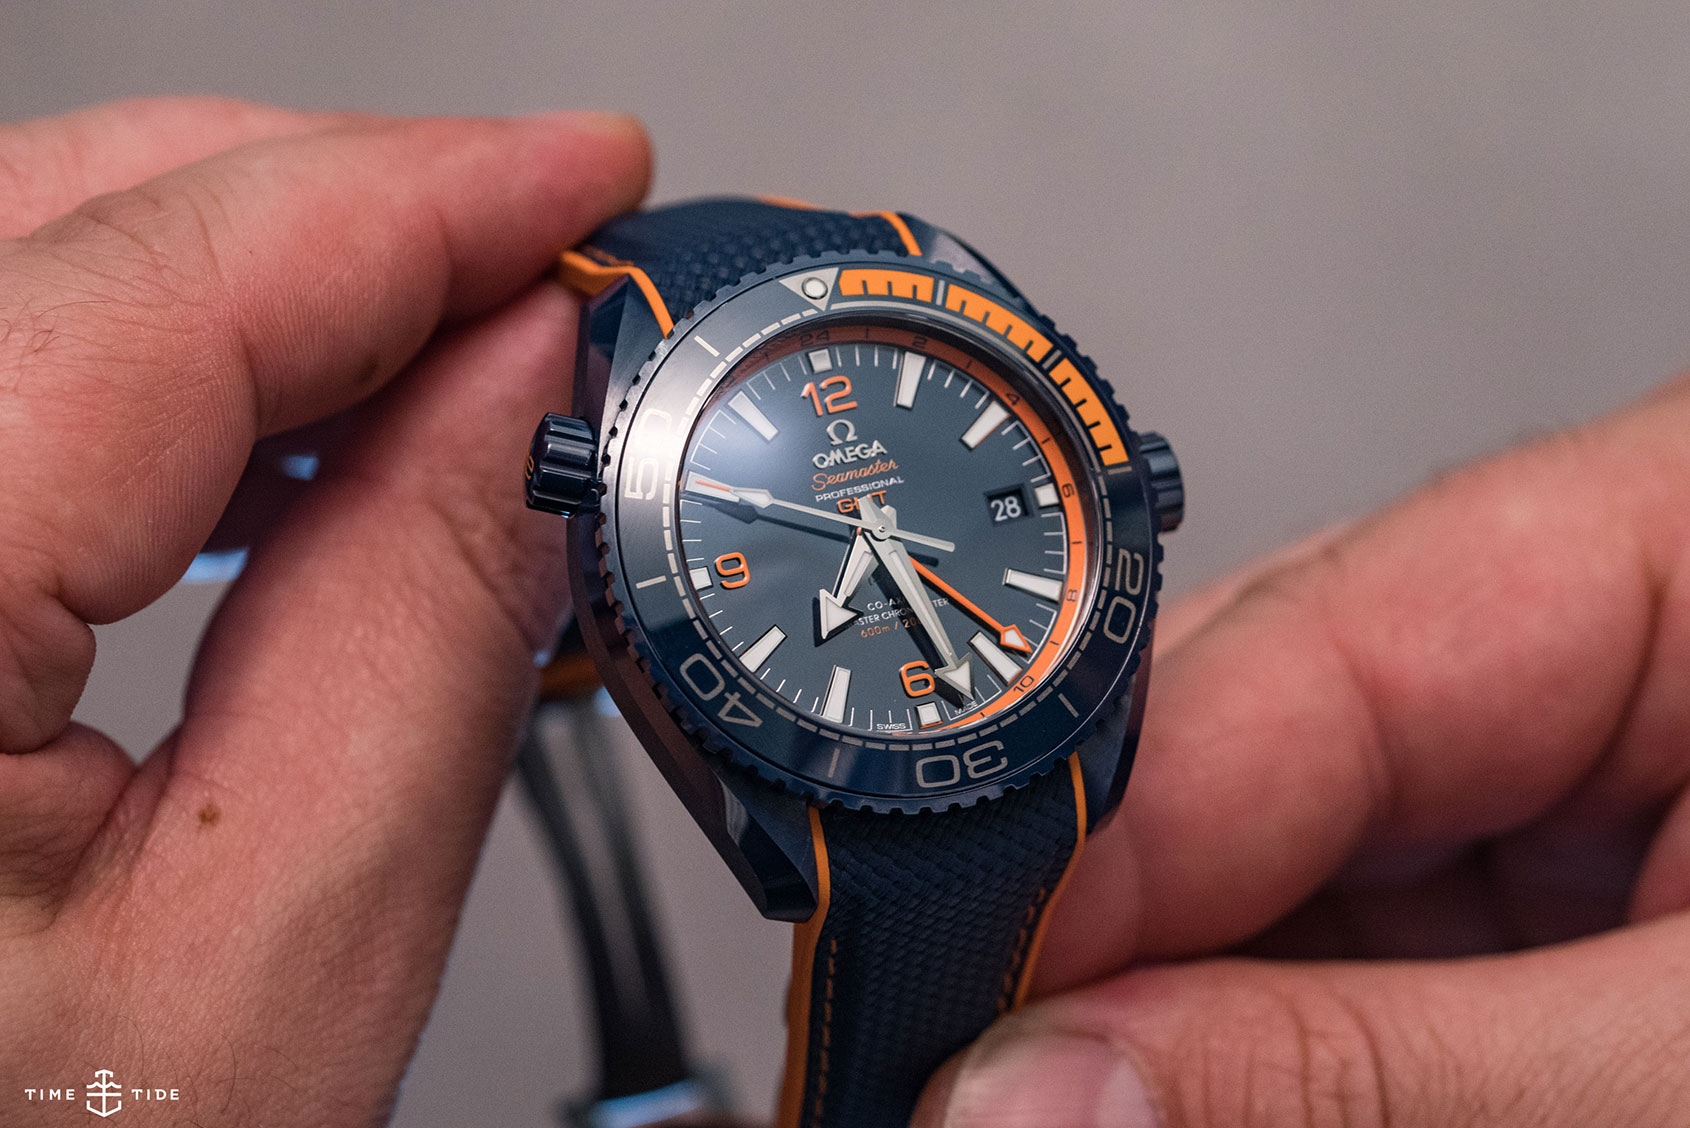 HANDS-ON: The Omega Seamaster Planet Ocean “Big Blue” lives up to its name